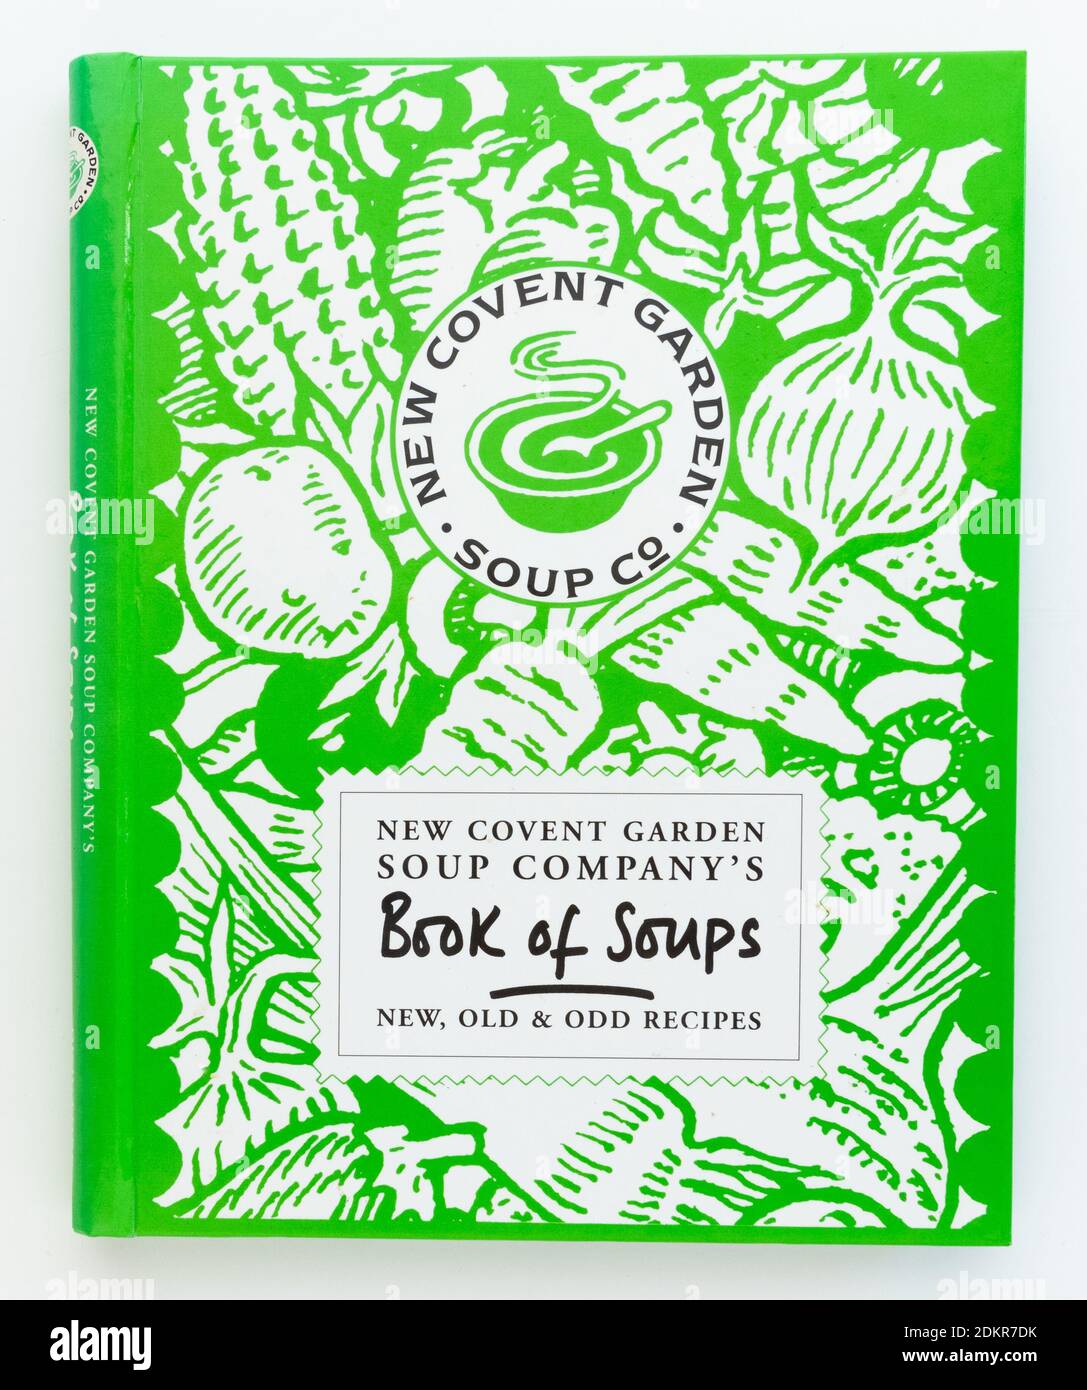 New Covent Garden Soup Company's Book of soupes Banque D'Images